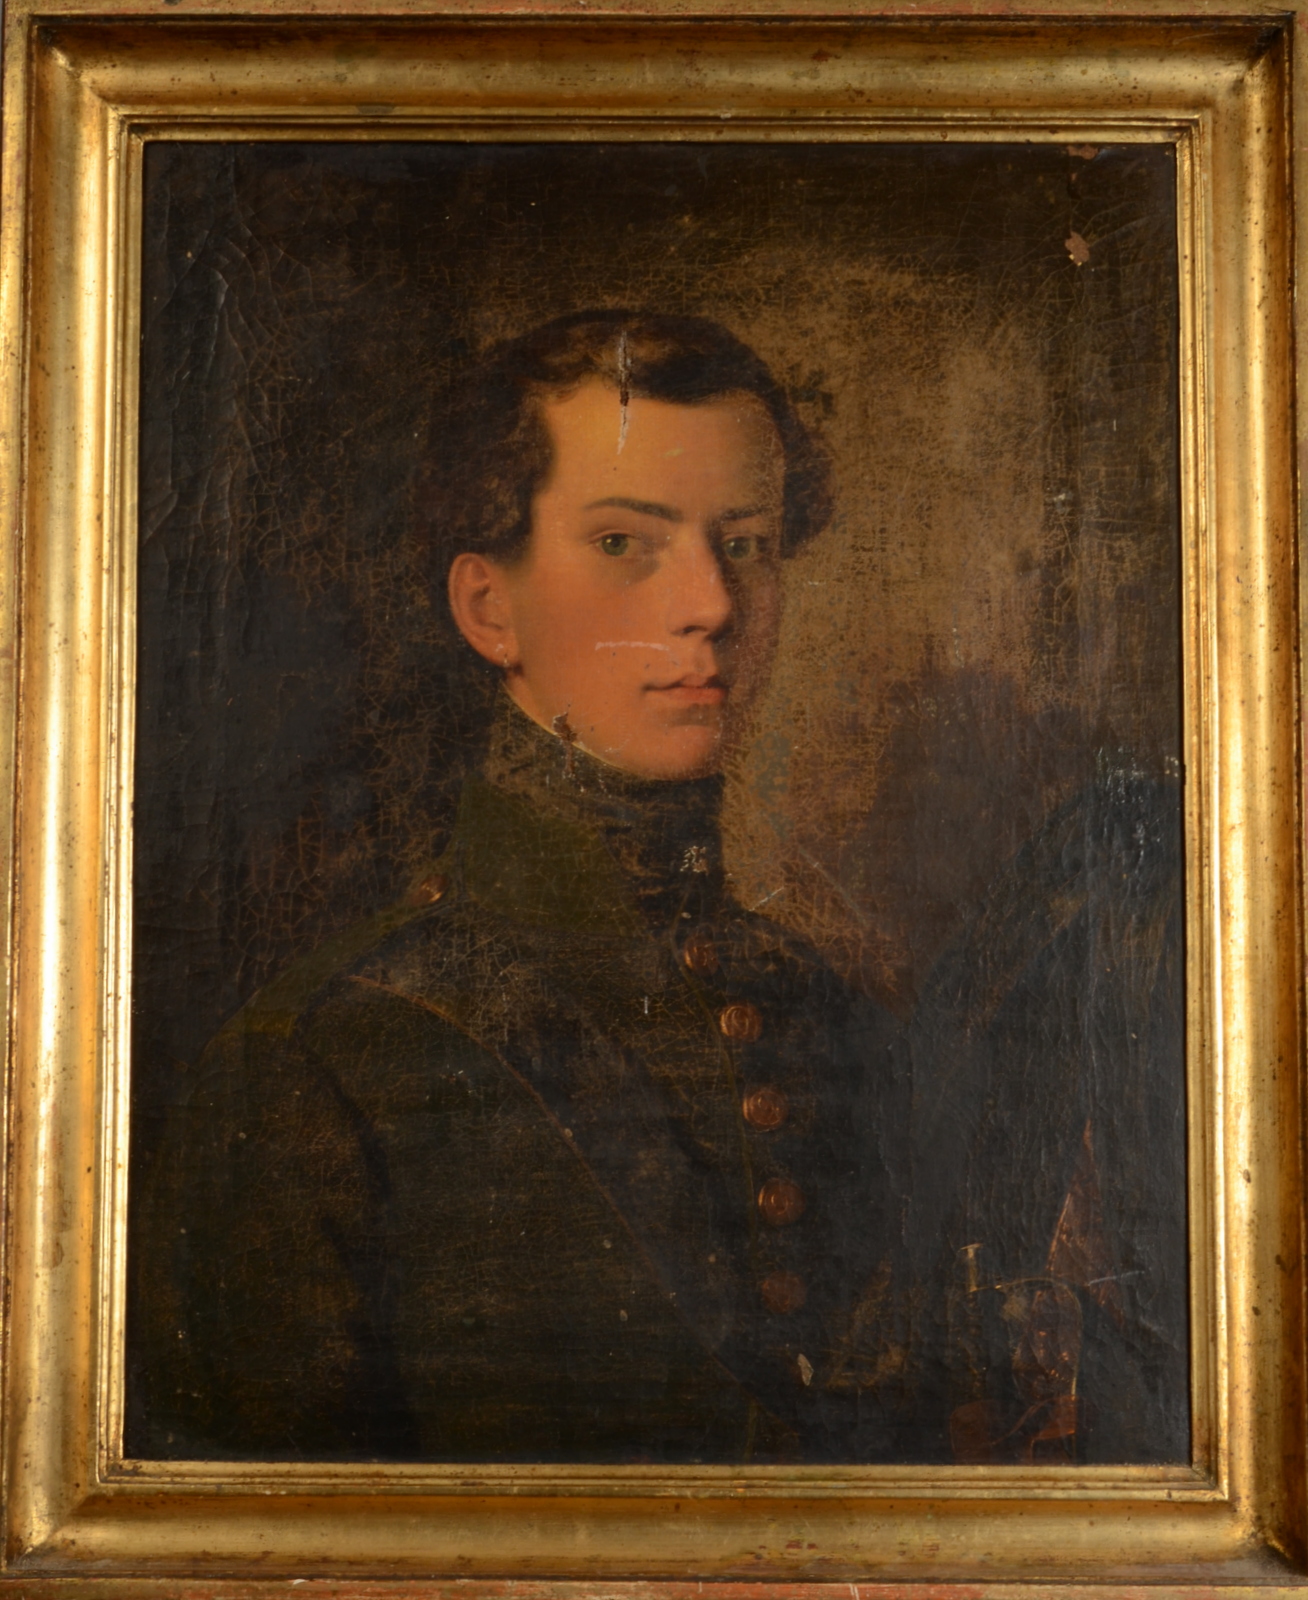 Mid 19th century portrait of a young officer Oil on canvas 62 x 49cm - Image 2 of 2